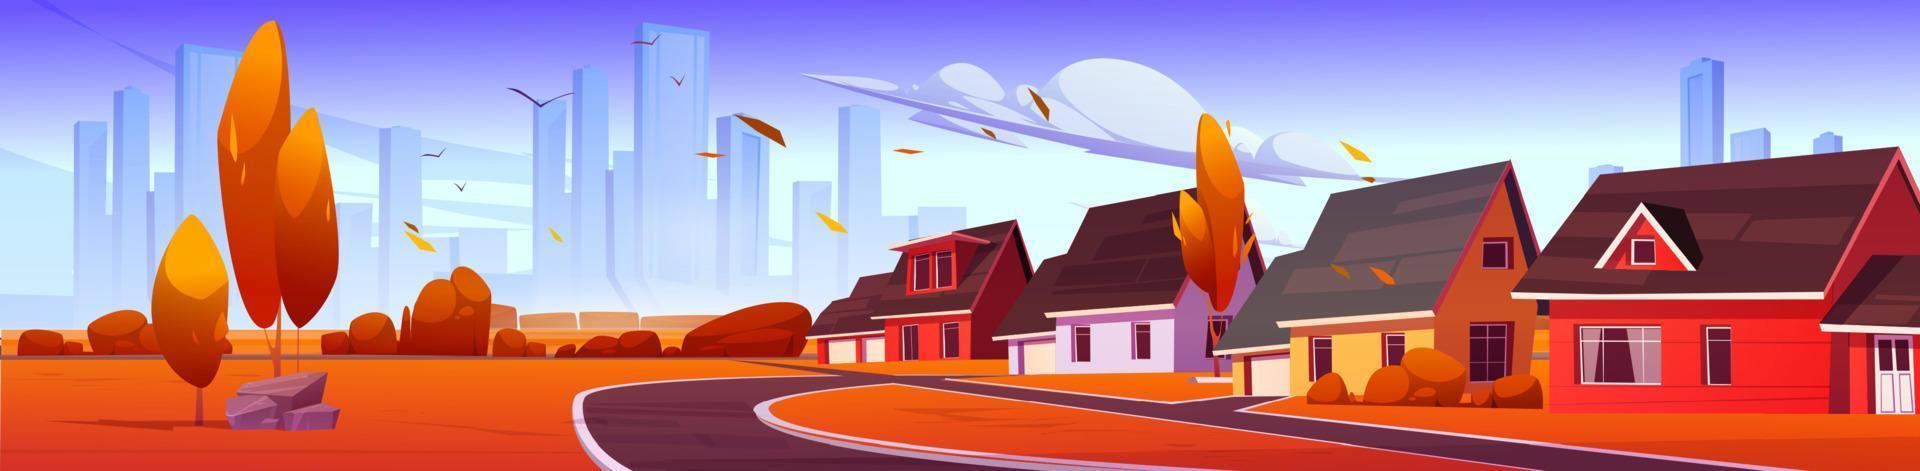 Suburb district with houses, road in autumn vector